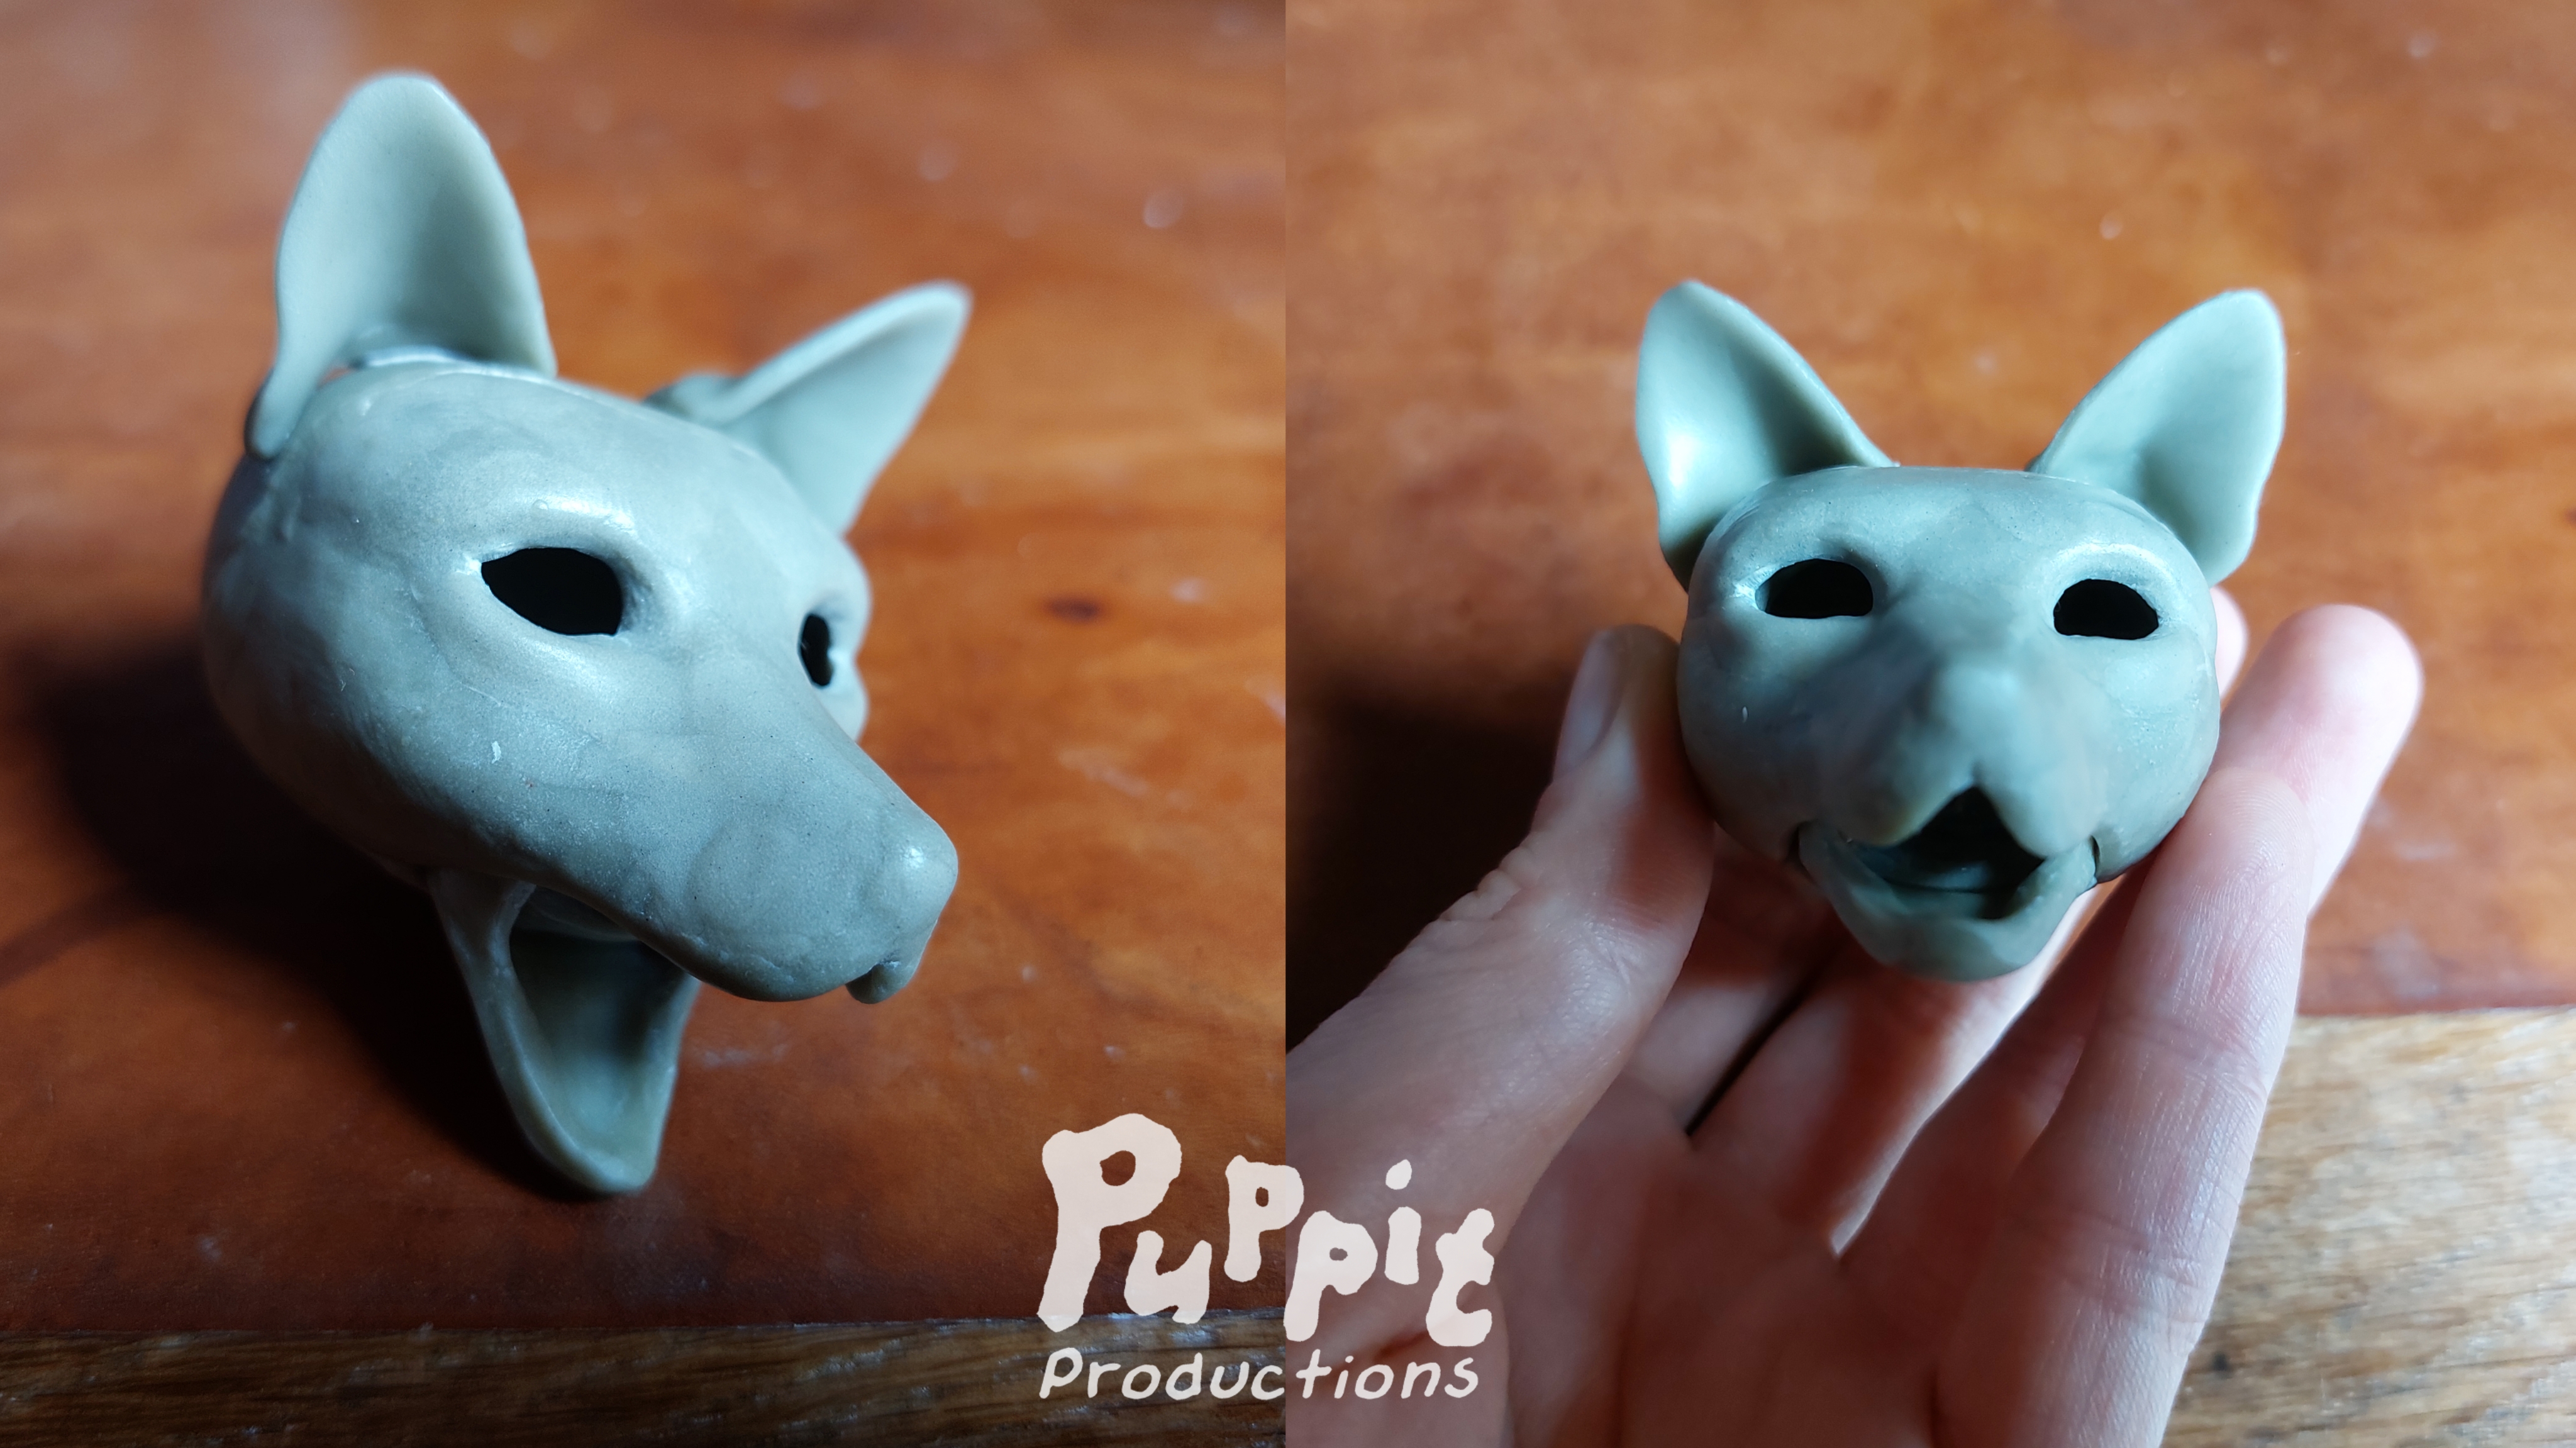 Two pictures side by side of a small red wolf doll head in grey clay, not fully detailed yet and without eyes. On the first picture the head is seen slightly from above at a roughly 30 degree angle with the mouth wide open. On the second picture the head is shown in a hand, positioned to be viewed directly from the front with the mouth halfway open.